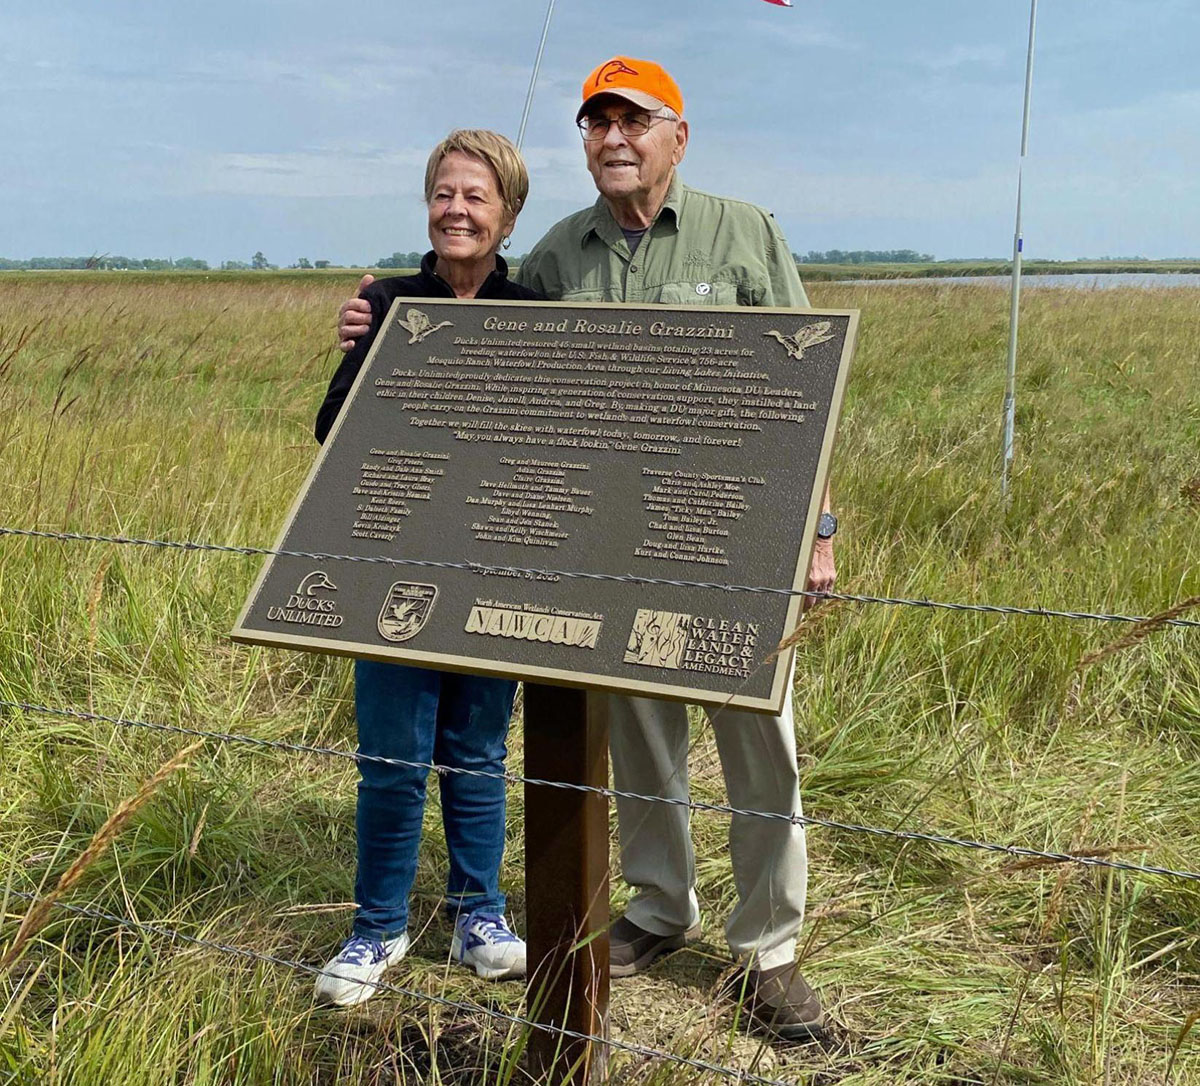 Gene and Rosalie Grazzini Honored for Conservation of Minnesota Wetlands  